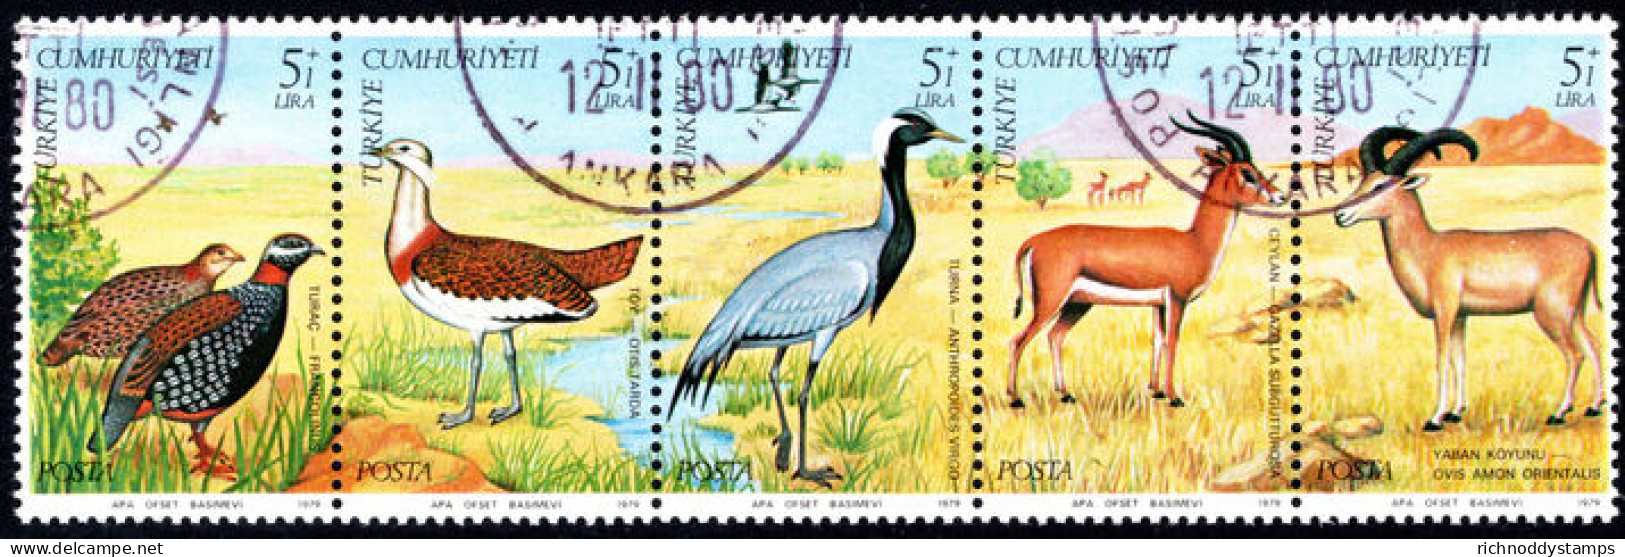 Turkey 1979 Wildlife Conservation Fine Used. - Used Stamps